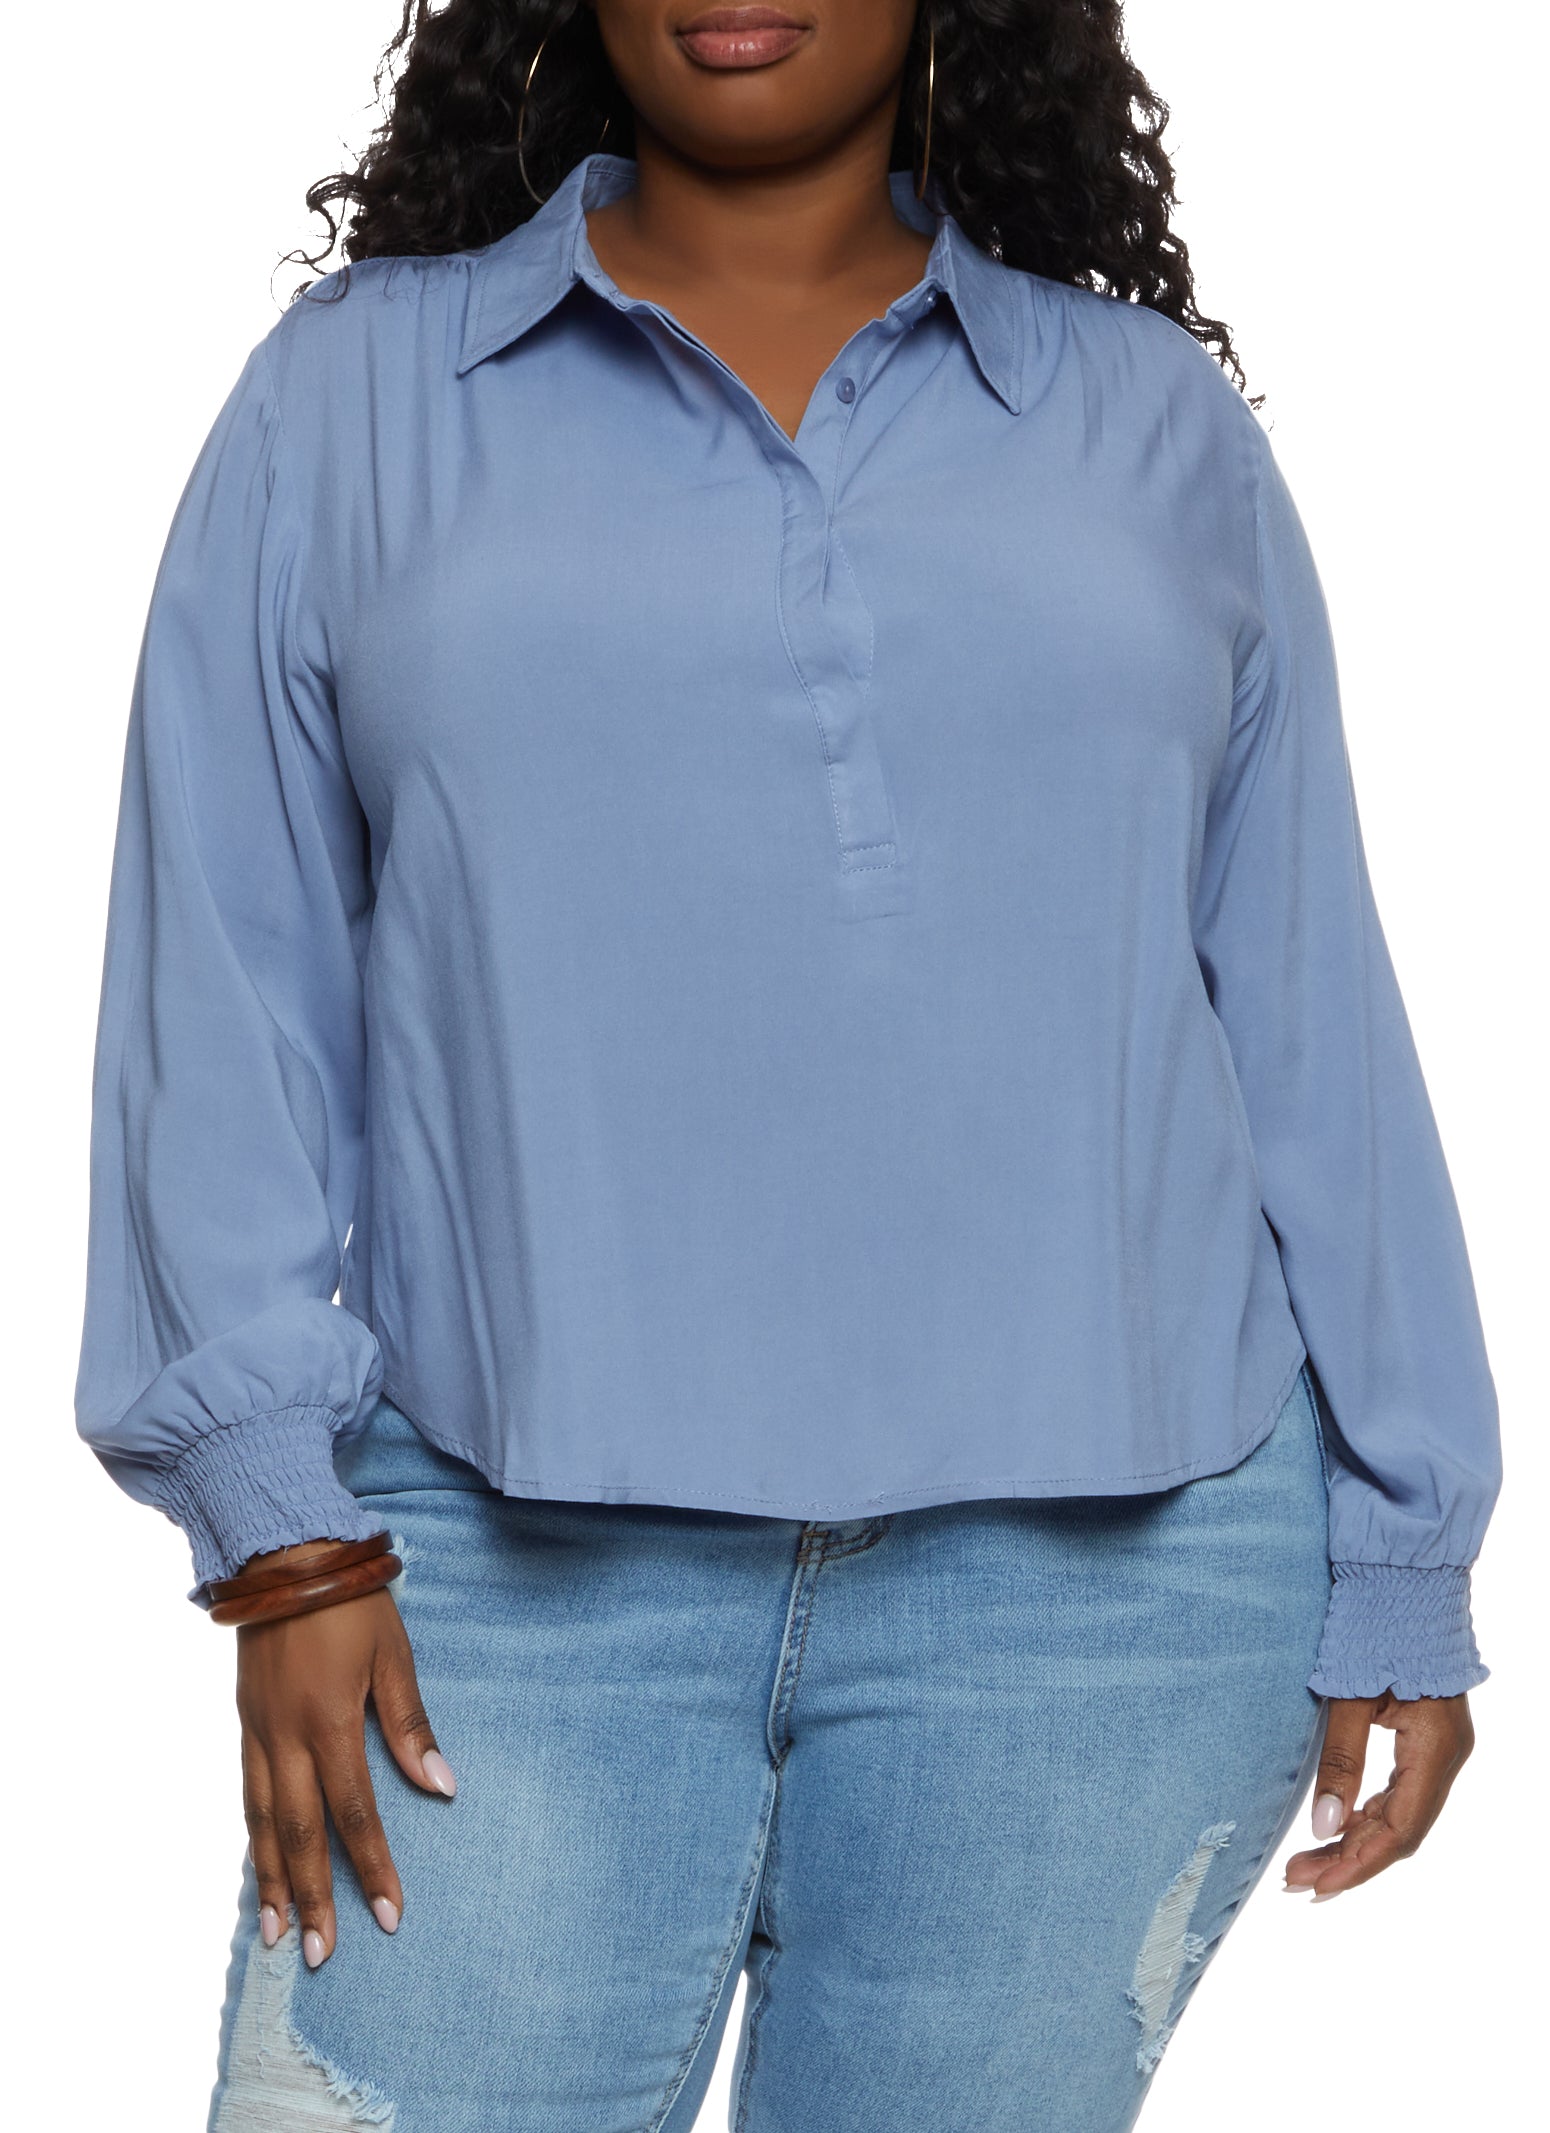 Womens Plus Size Smocked Cuff Popover Top, Blue, Size 3X